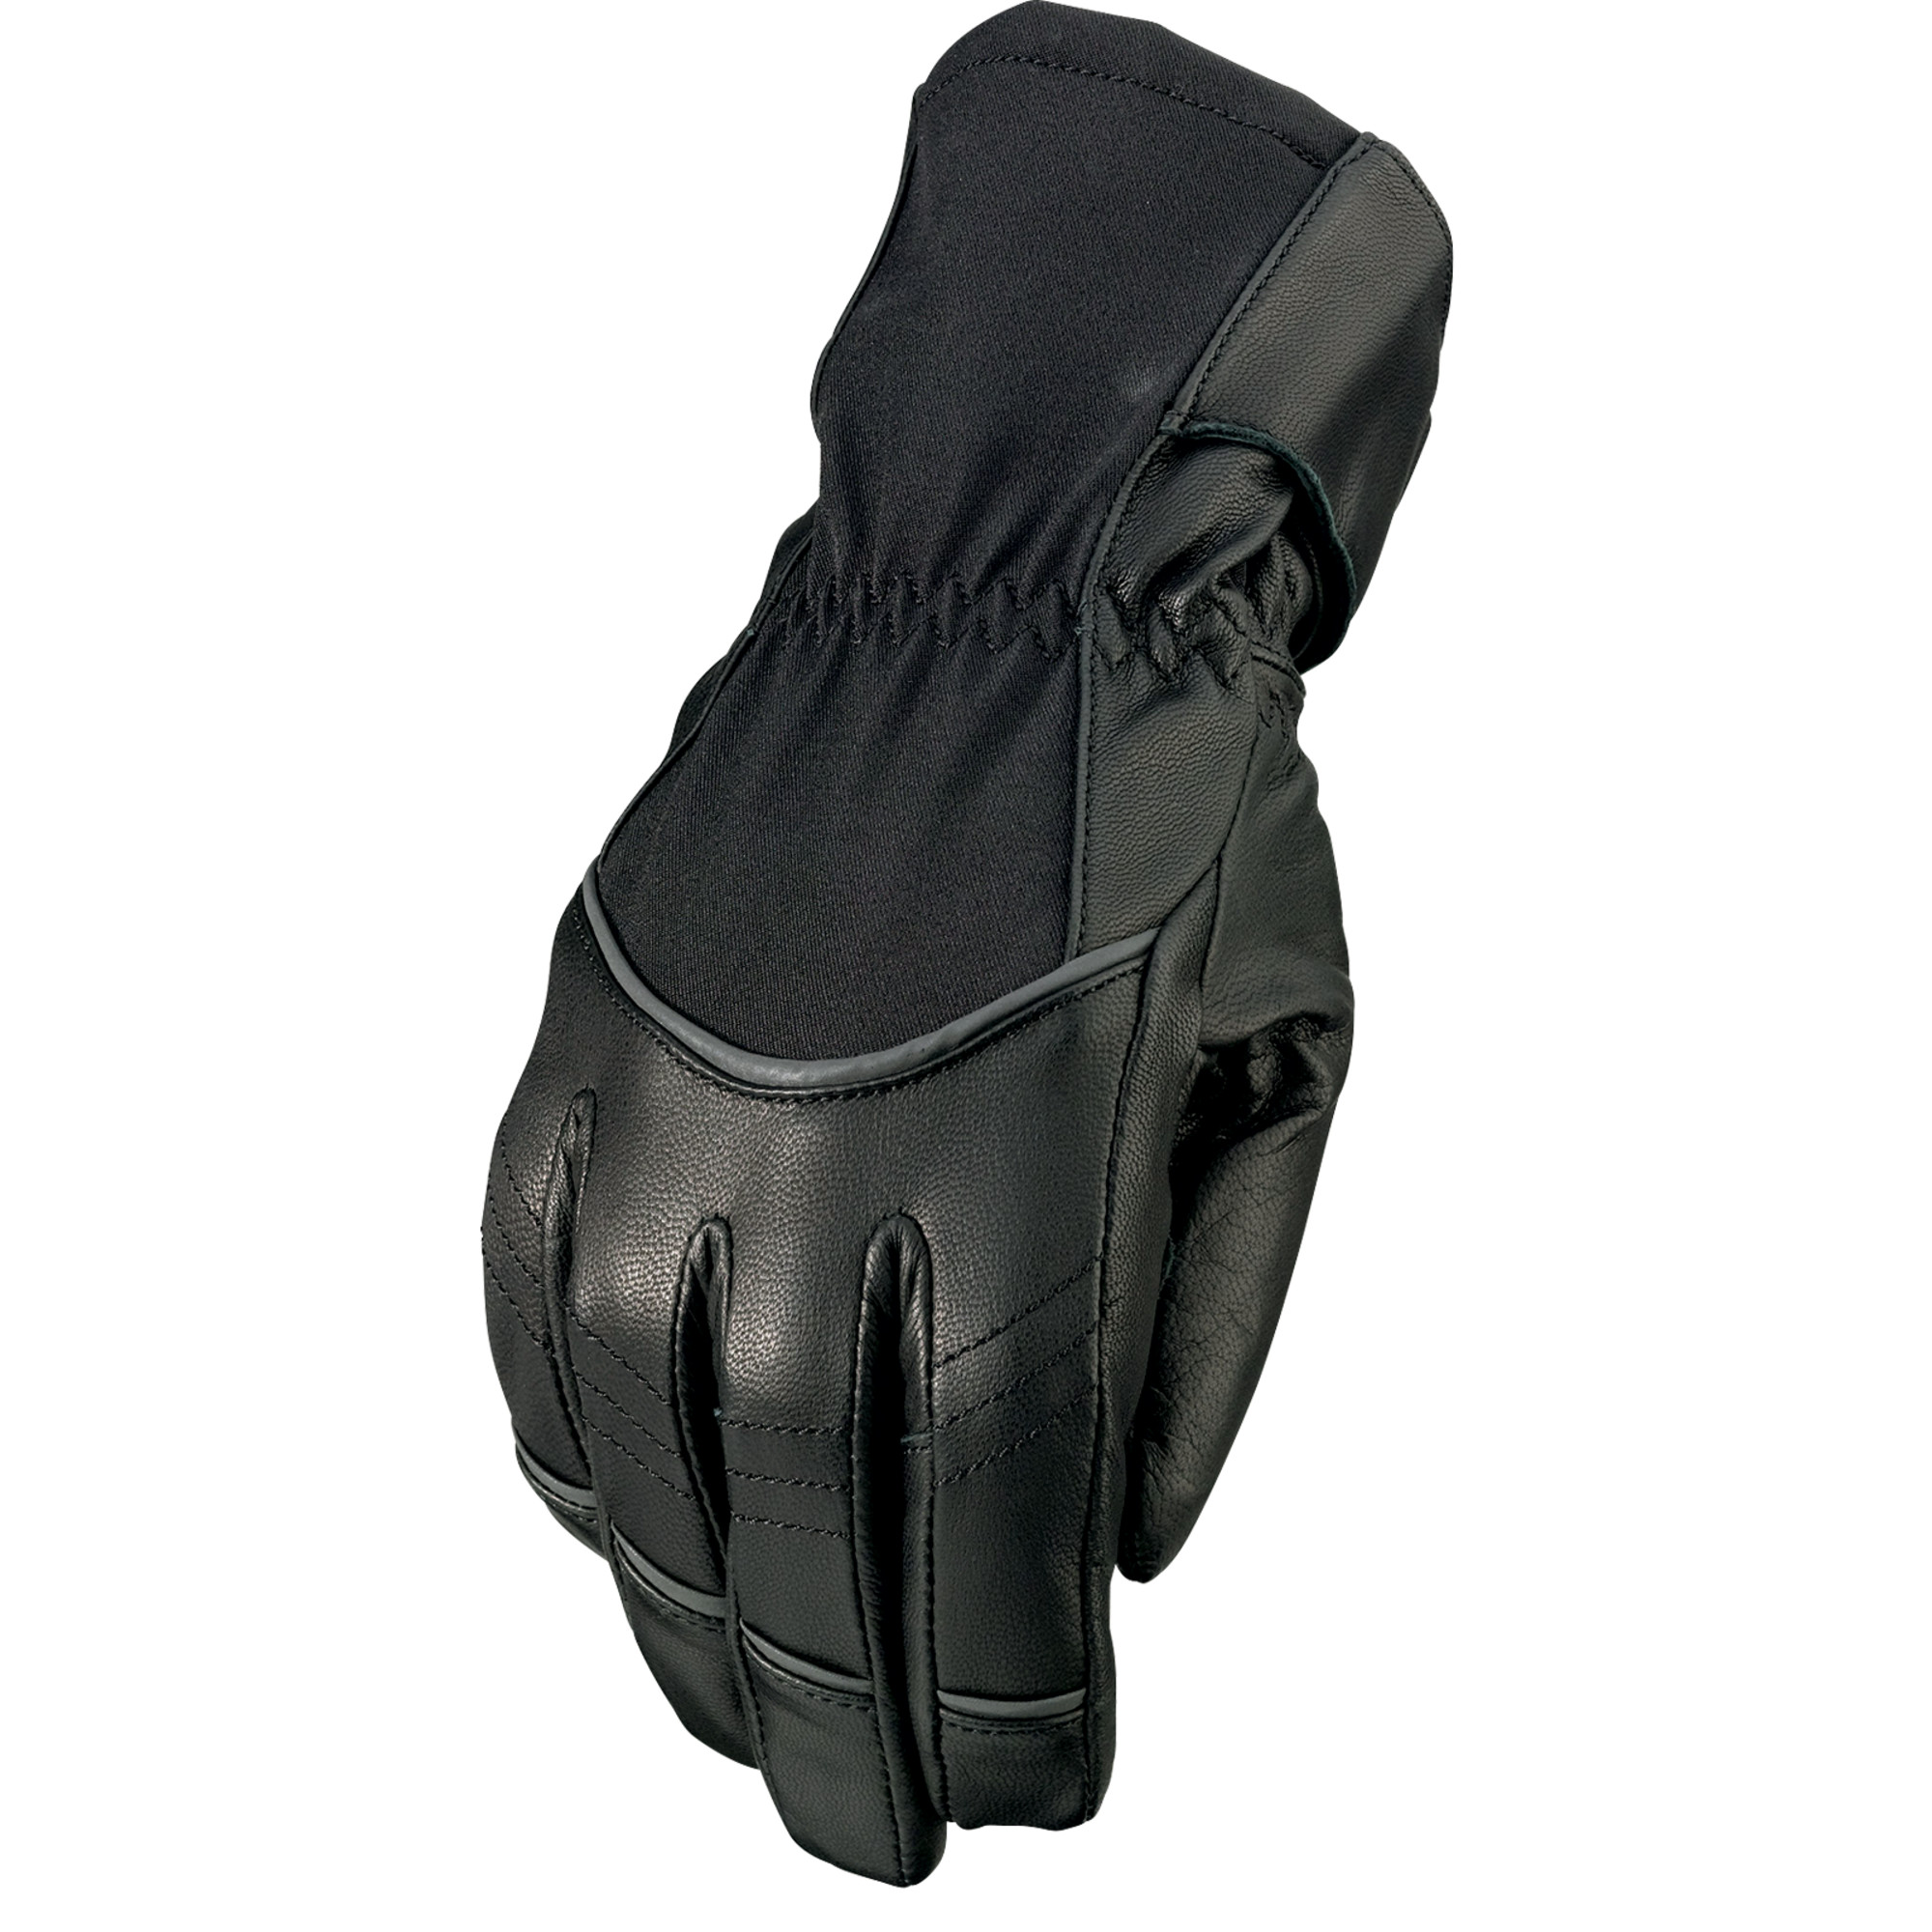 z1r textile gloves for womens recoil waterproof